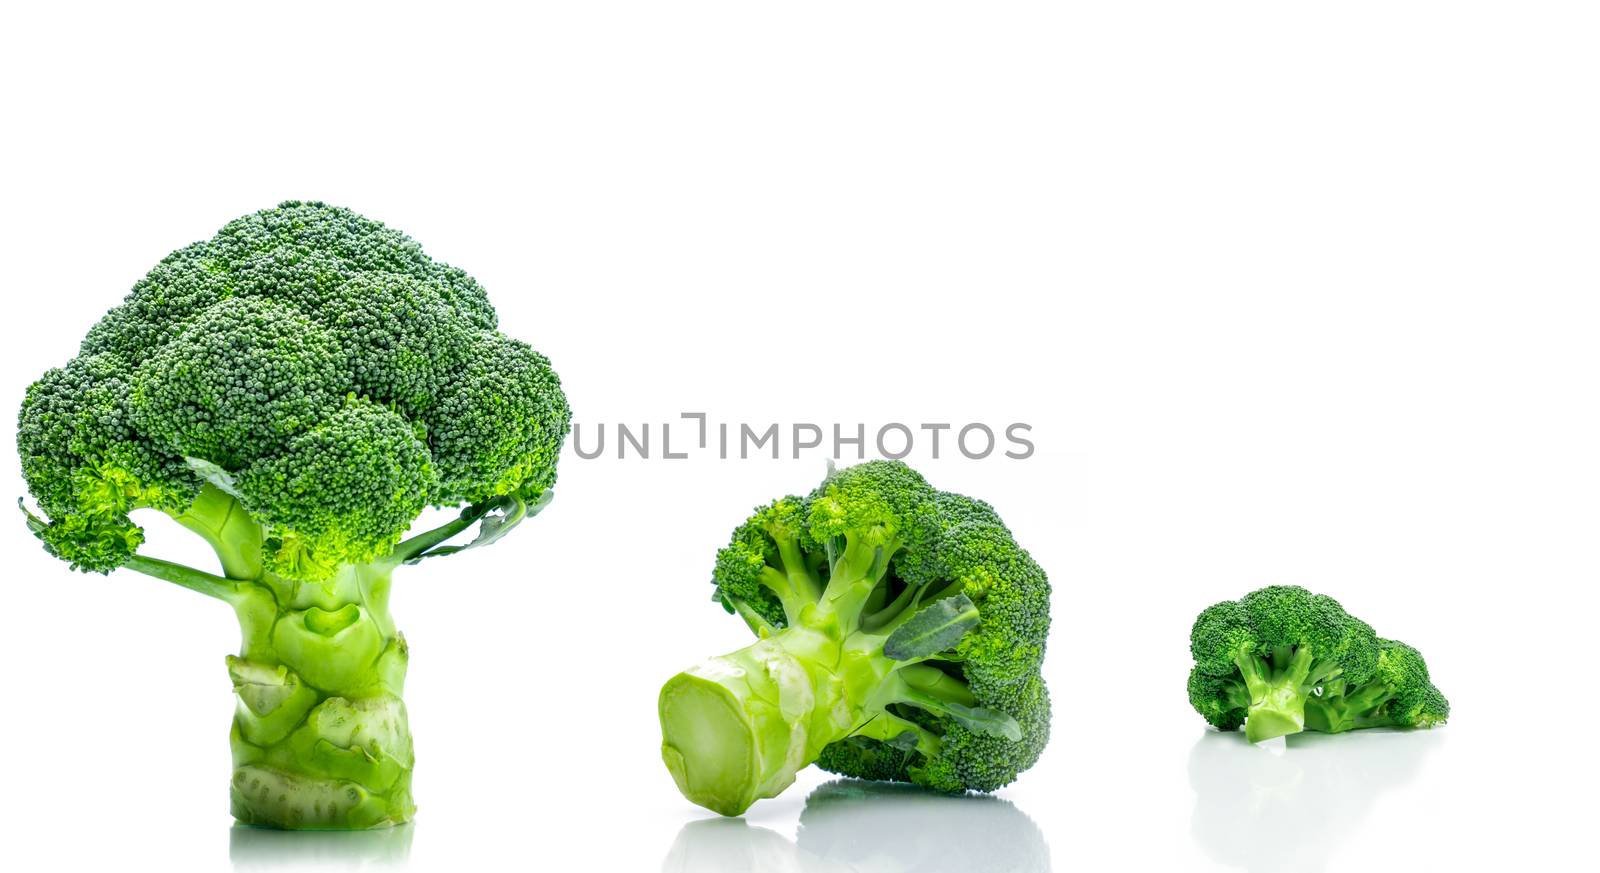 Set of green broccoli (Brassica oleracea). Vegetables natural source of betacarotene, vitamin c, vitamin k, fiber food, folate. Fresh broccoli cabbage isolated on white background. by Fahroni